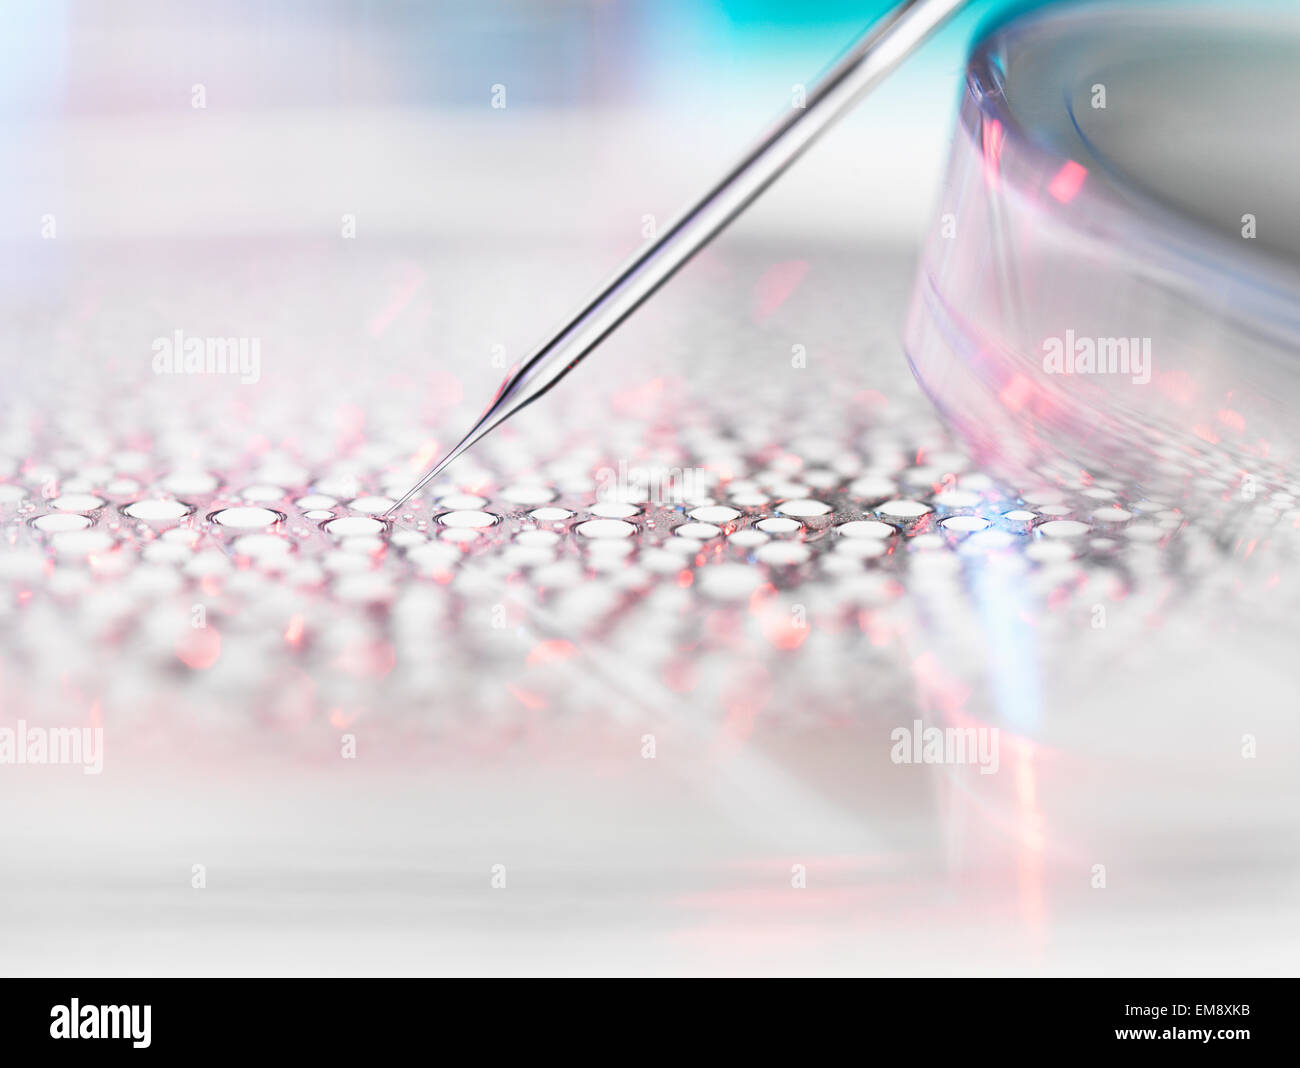 Stem cell research, nuclear transfer of embryonic stem cells used in cloning for medical research Stock Photo